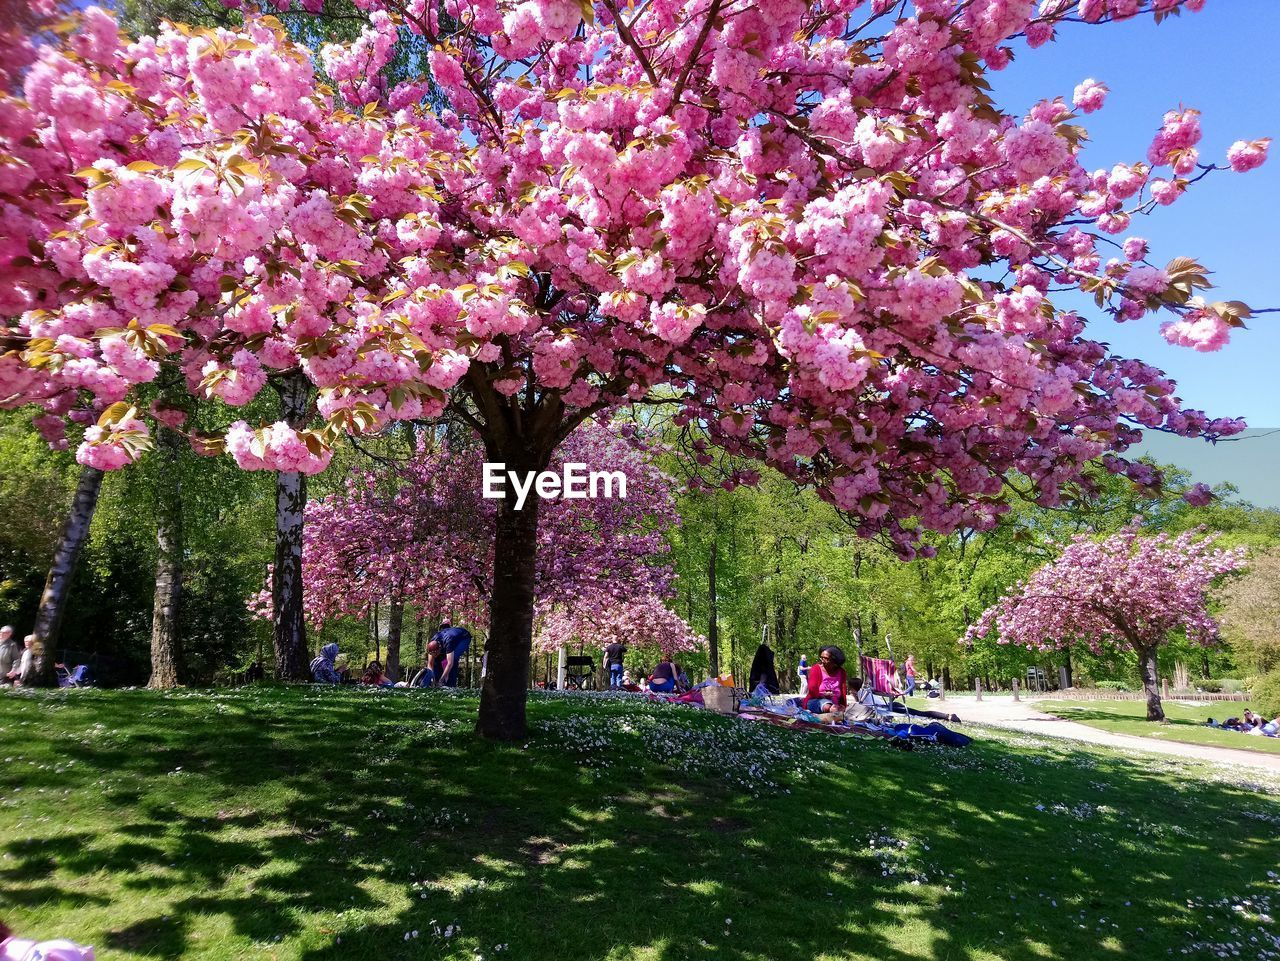 Group of people sitting by blossoms trees in park